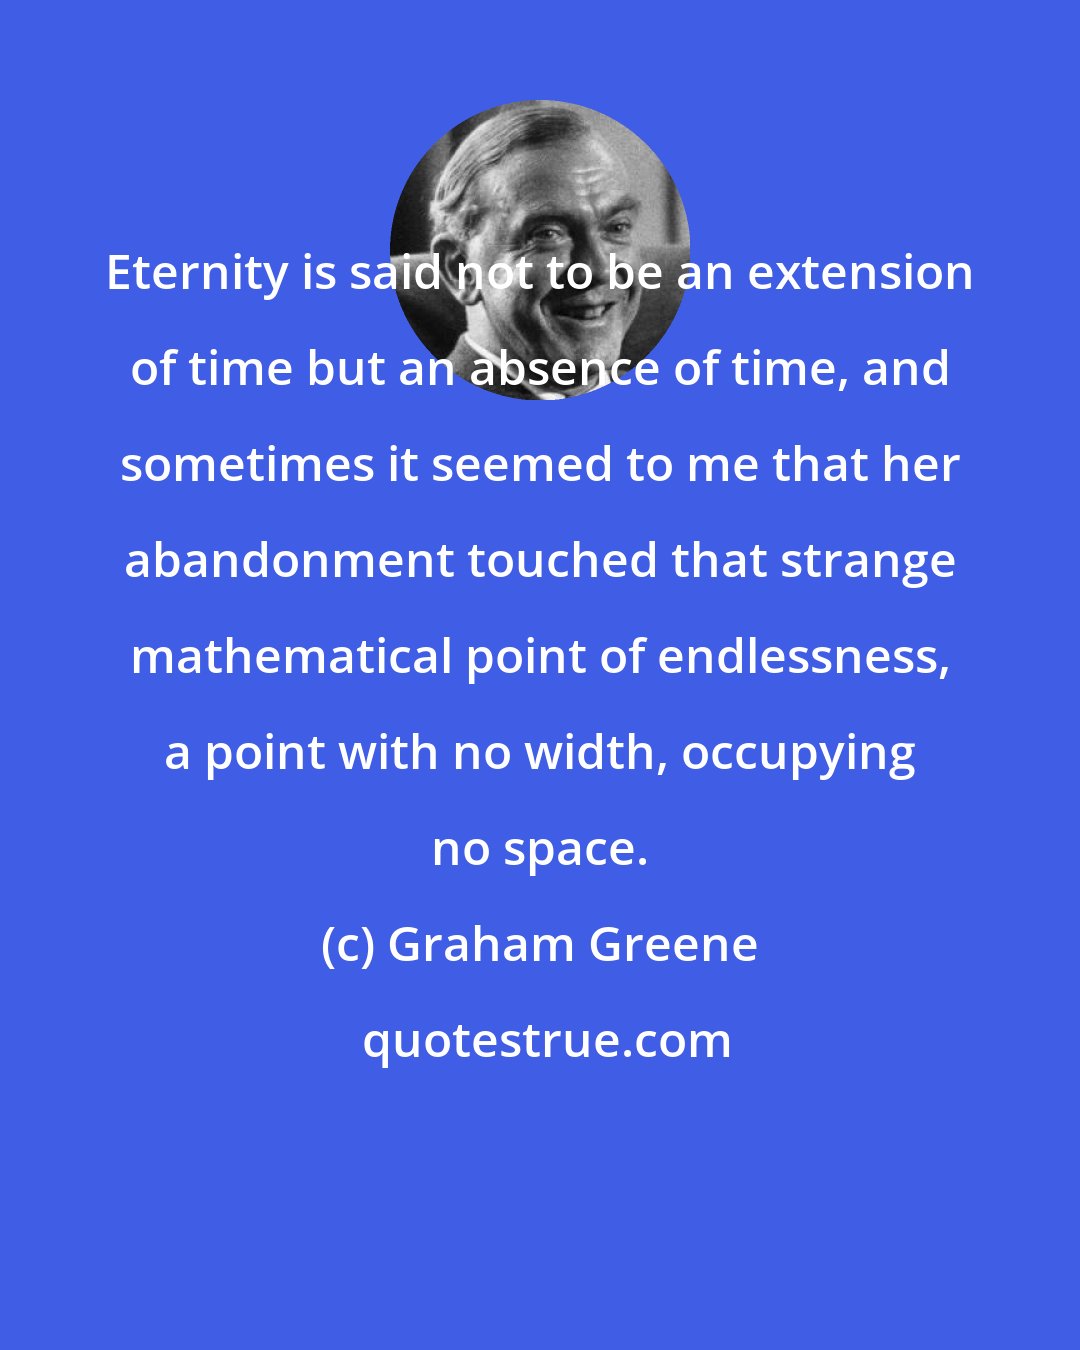 Graham Greene: Eternity is said not to be an extension of time but an absence of time, and sometimes it seemed to me that her abandonment touched that strange mathematical point of endlessness, a point with no width, occupying no space.